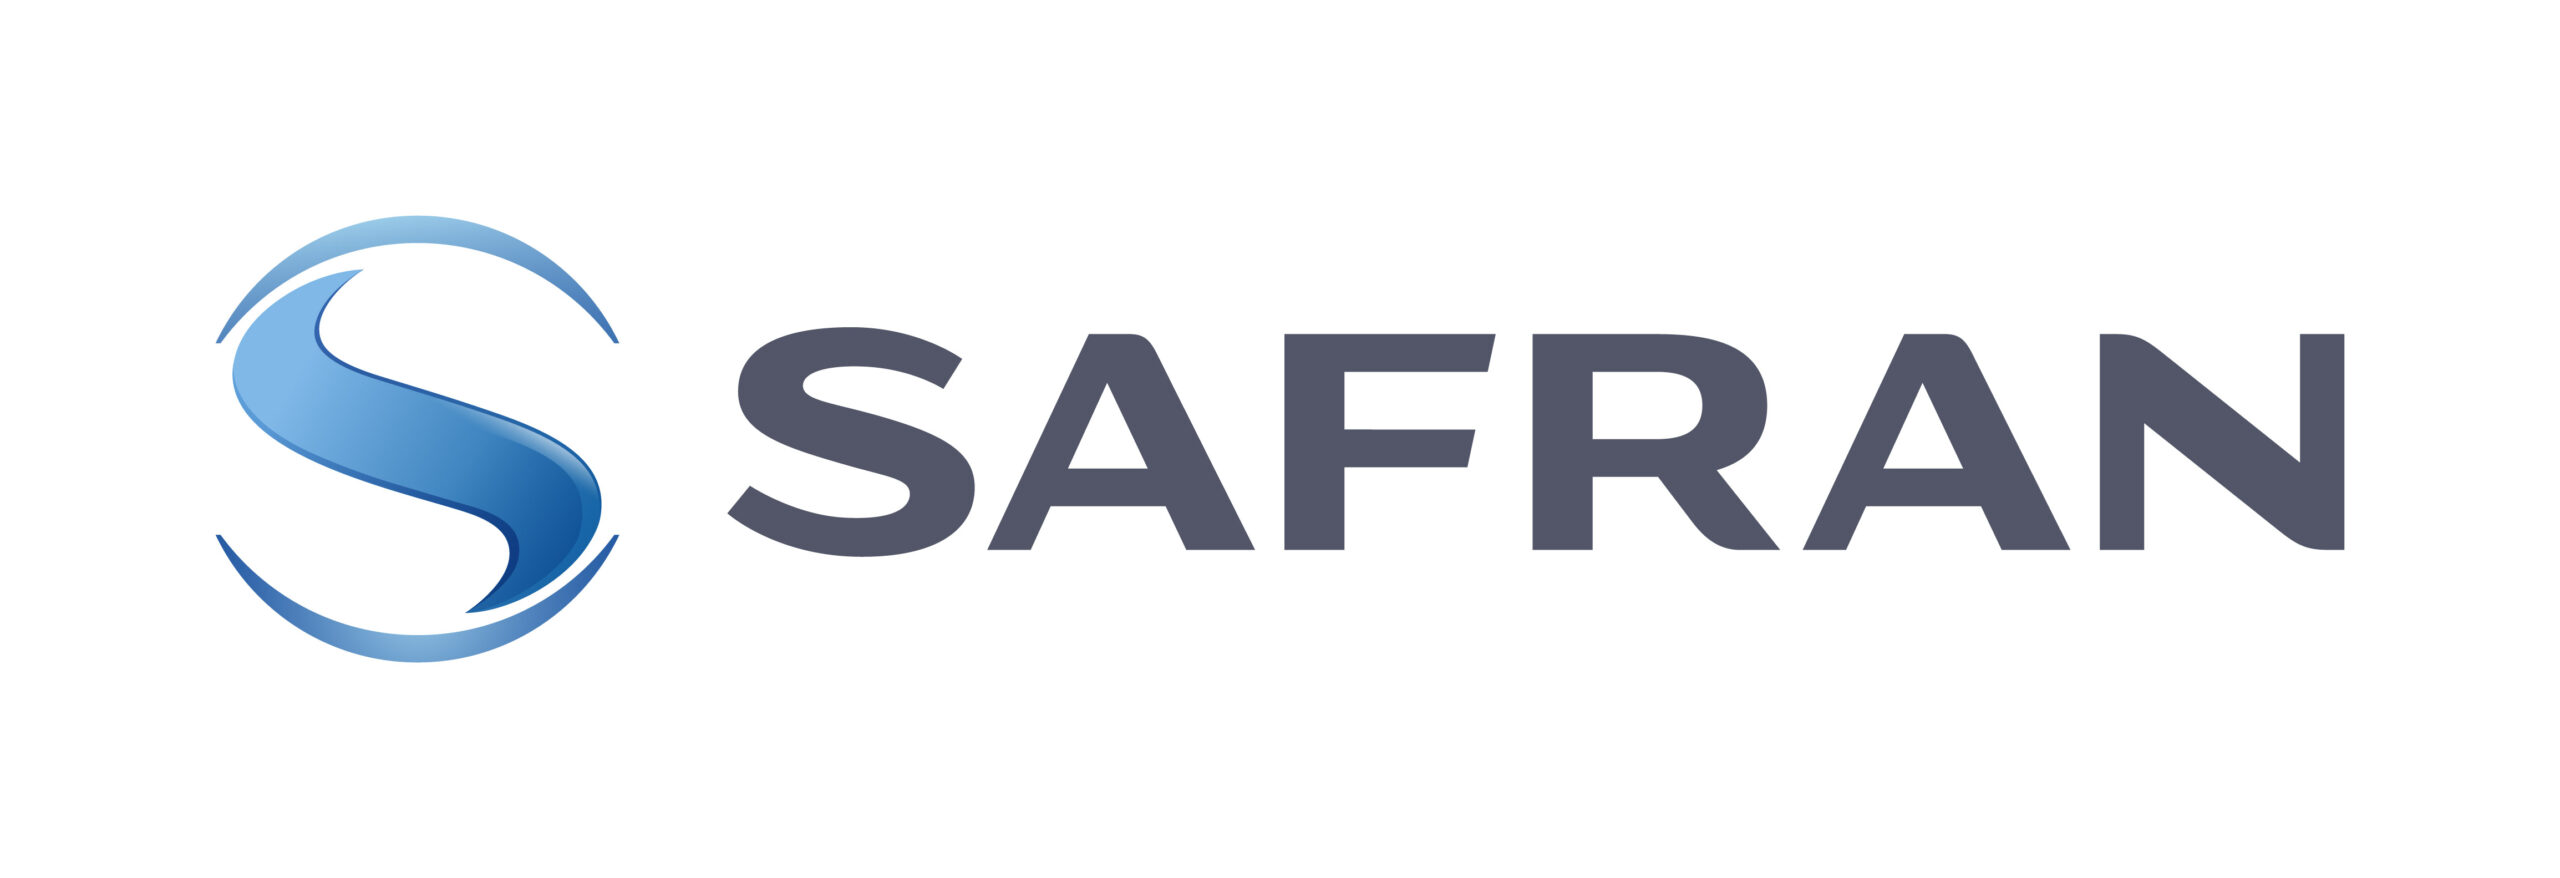 France’s Safran to pay $17.2 million to settle China Bribery in US probe